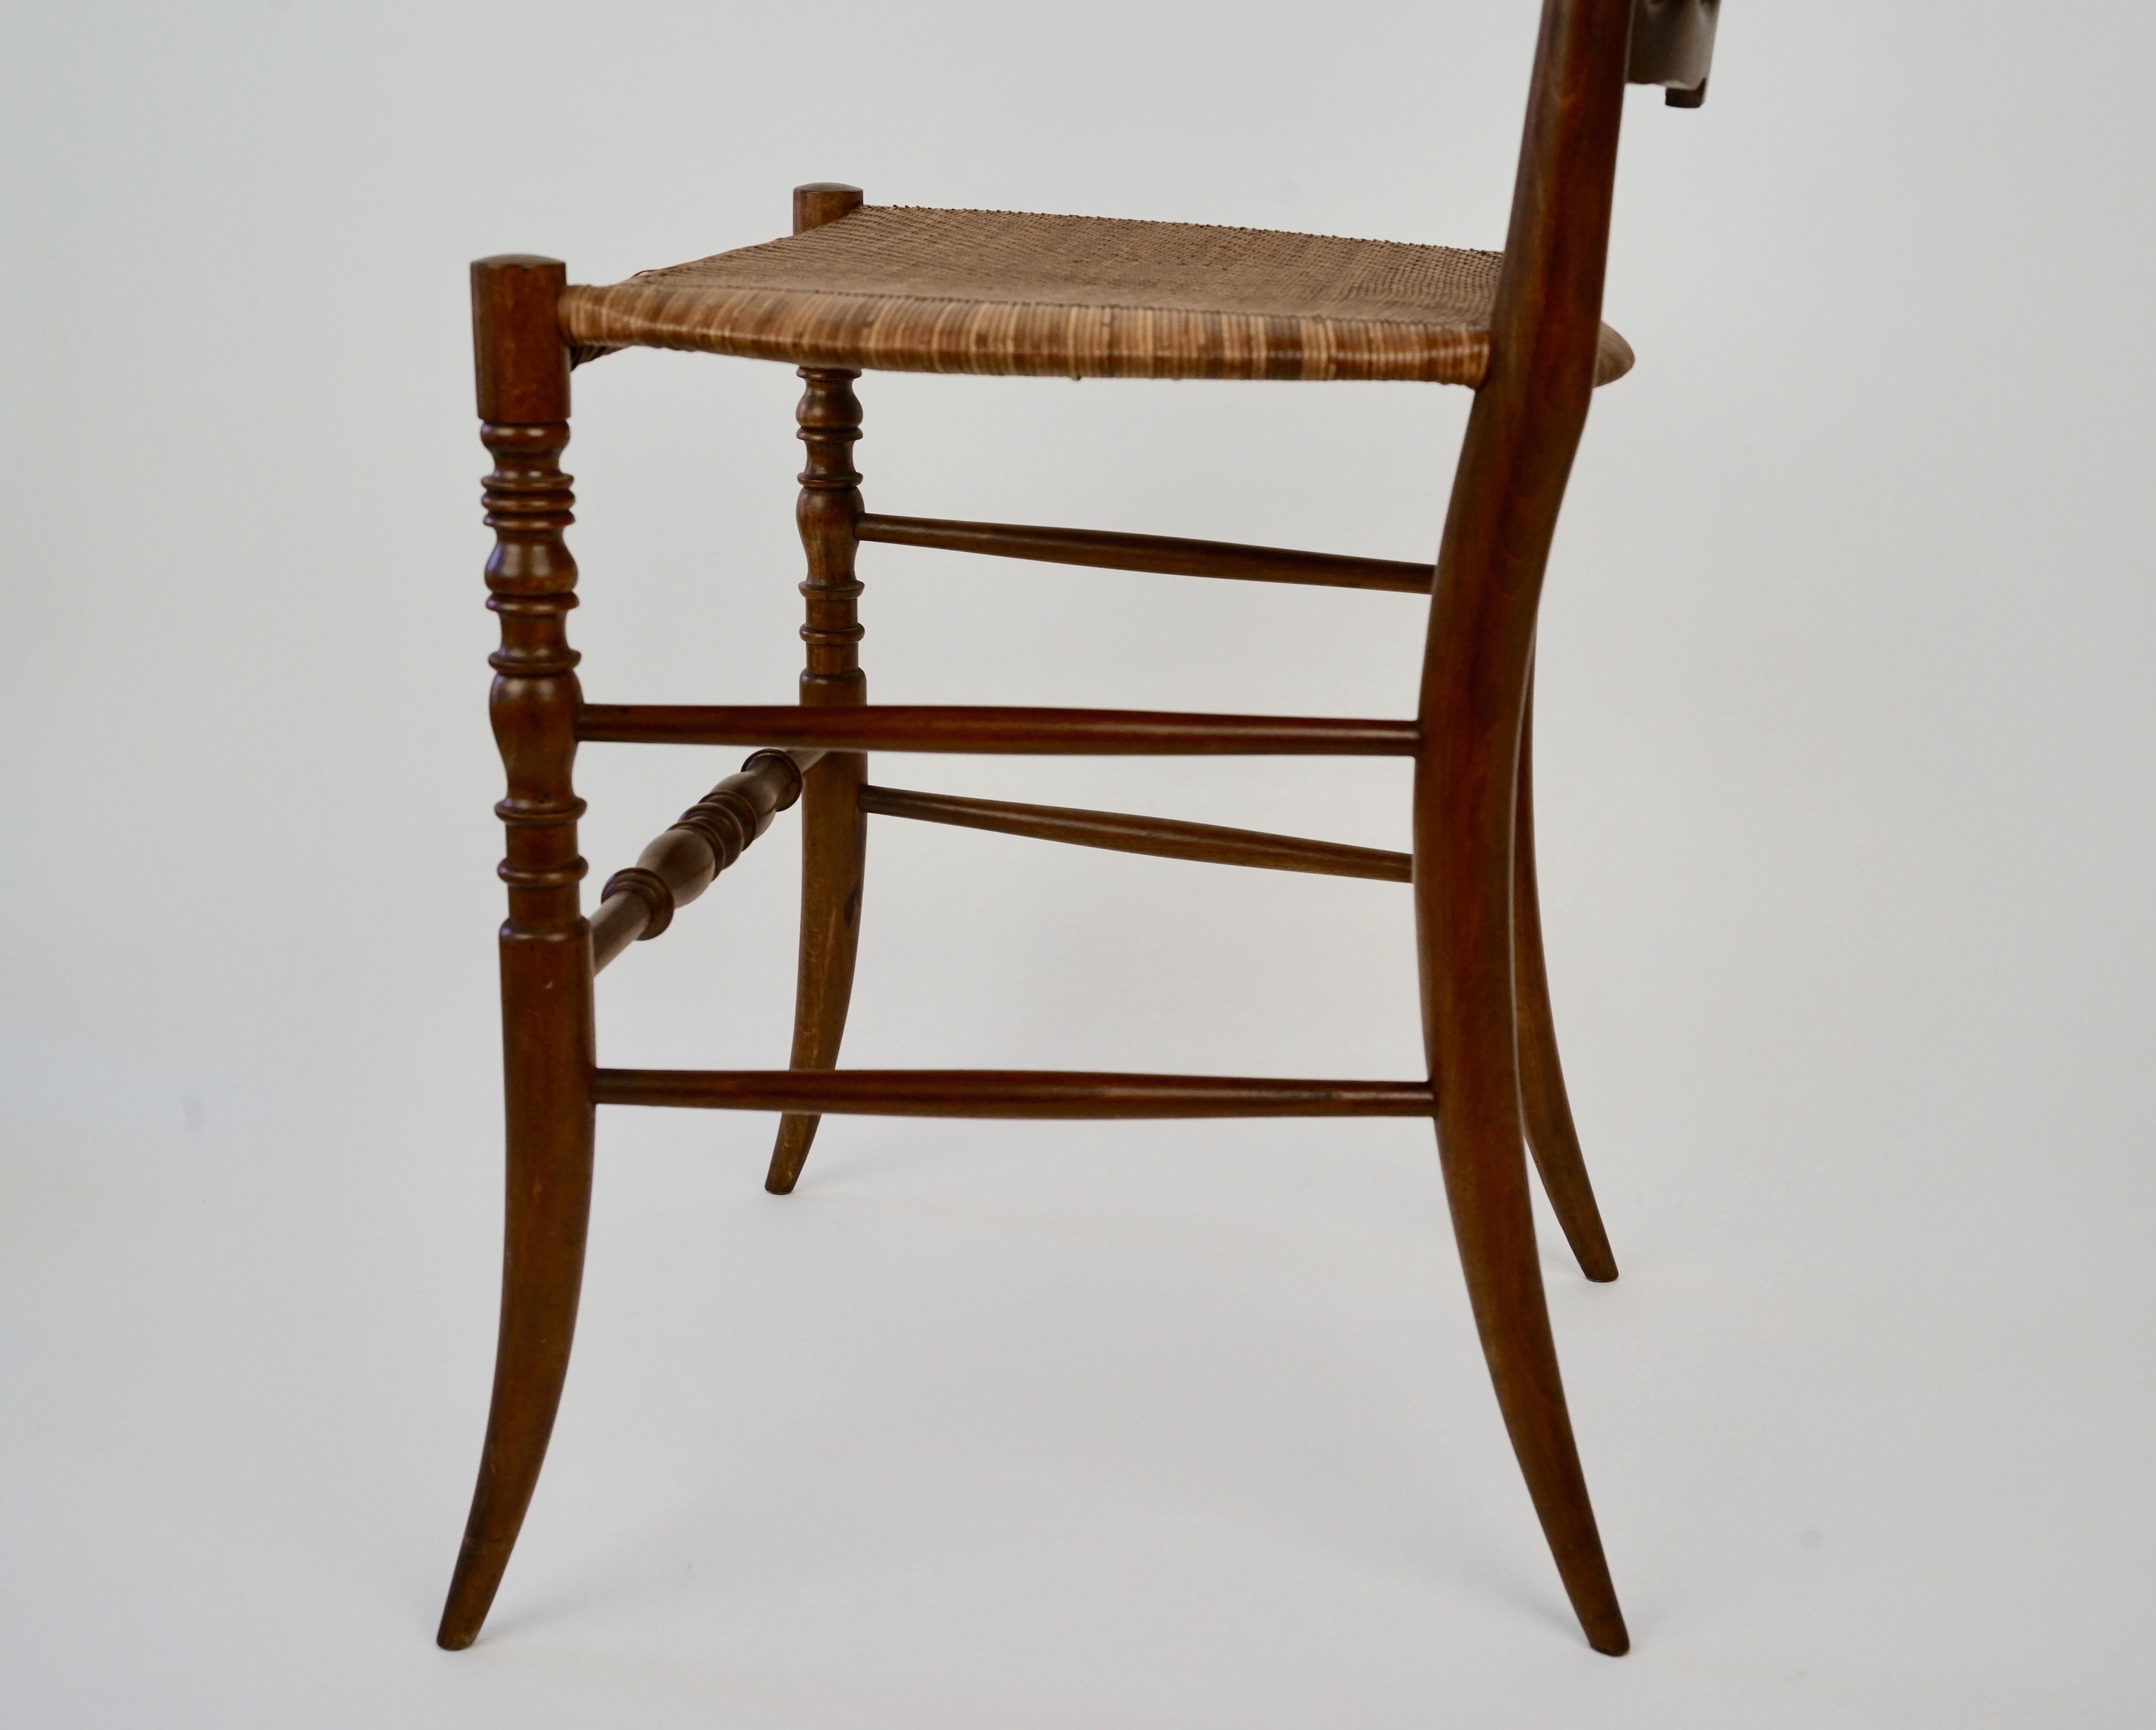 Carved Mid-Century Chiavari Chair, Model Parisienne, with Cane Seat